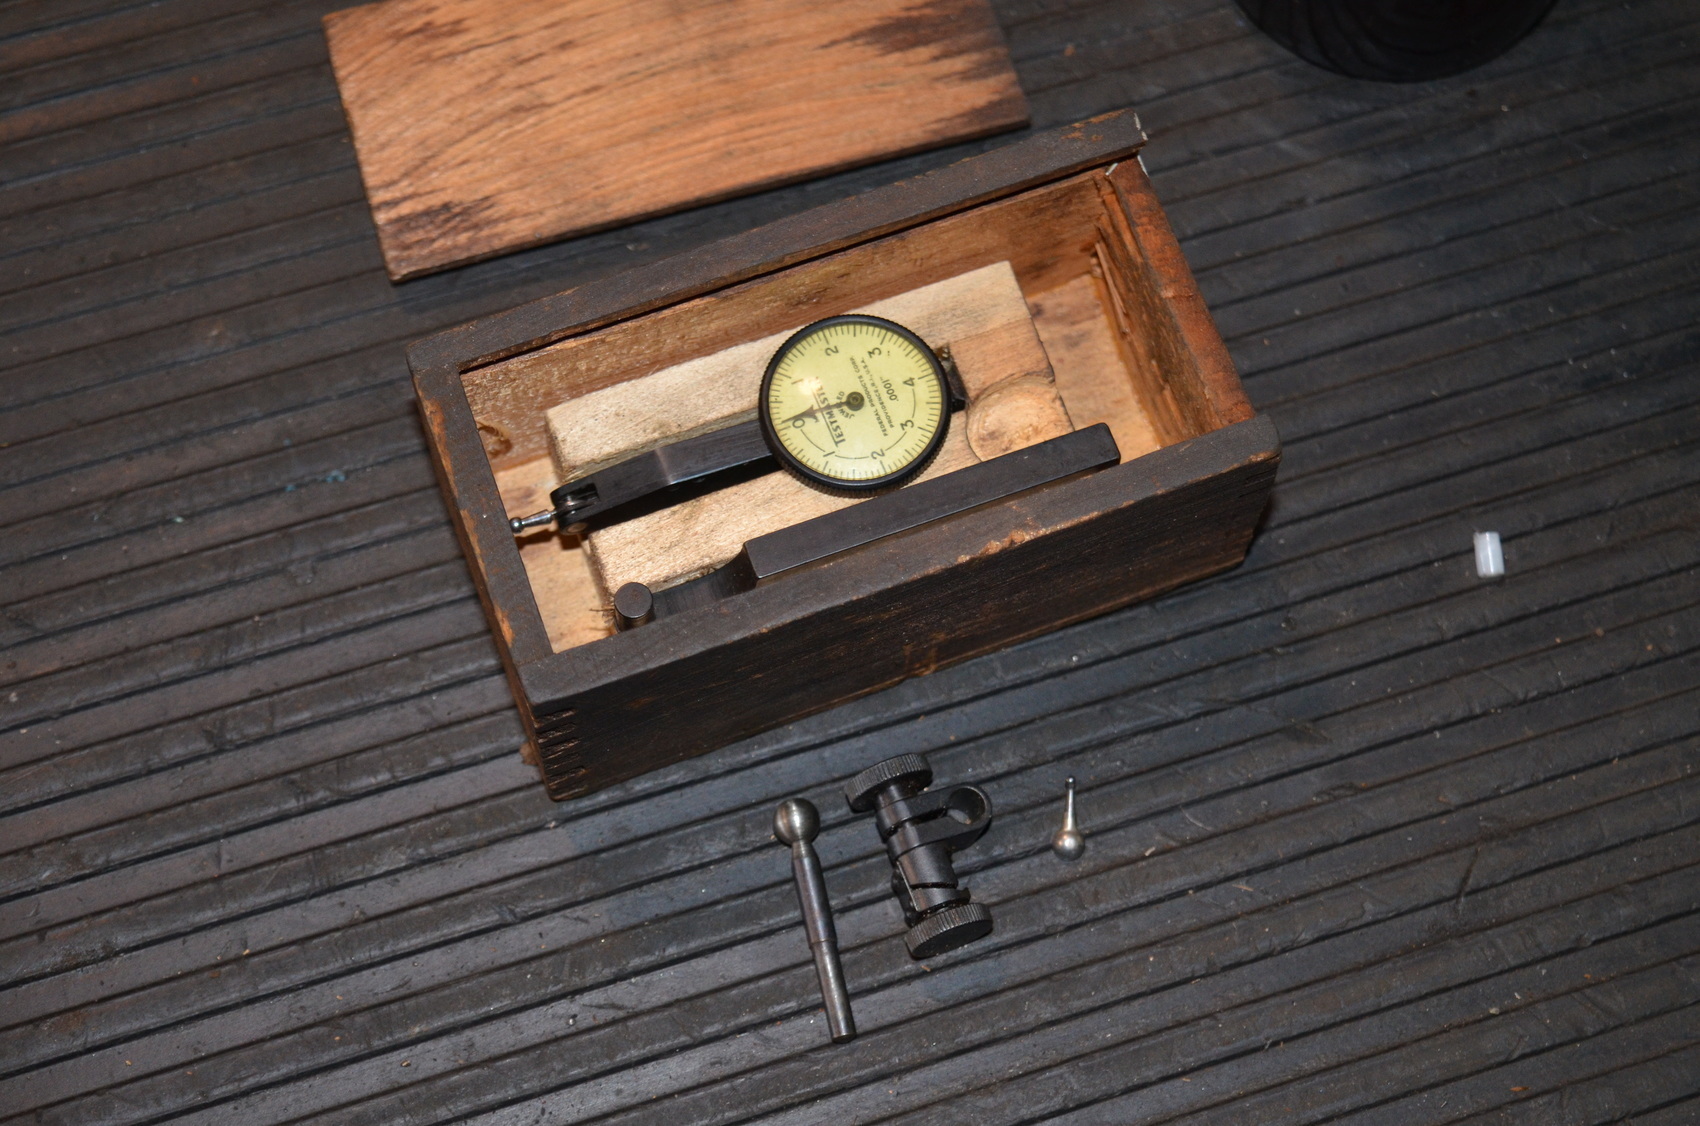 FEDERAL NO.M-2 TESTMASTER DIAL TEST INDICATOR in a wooden case